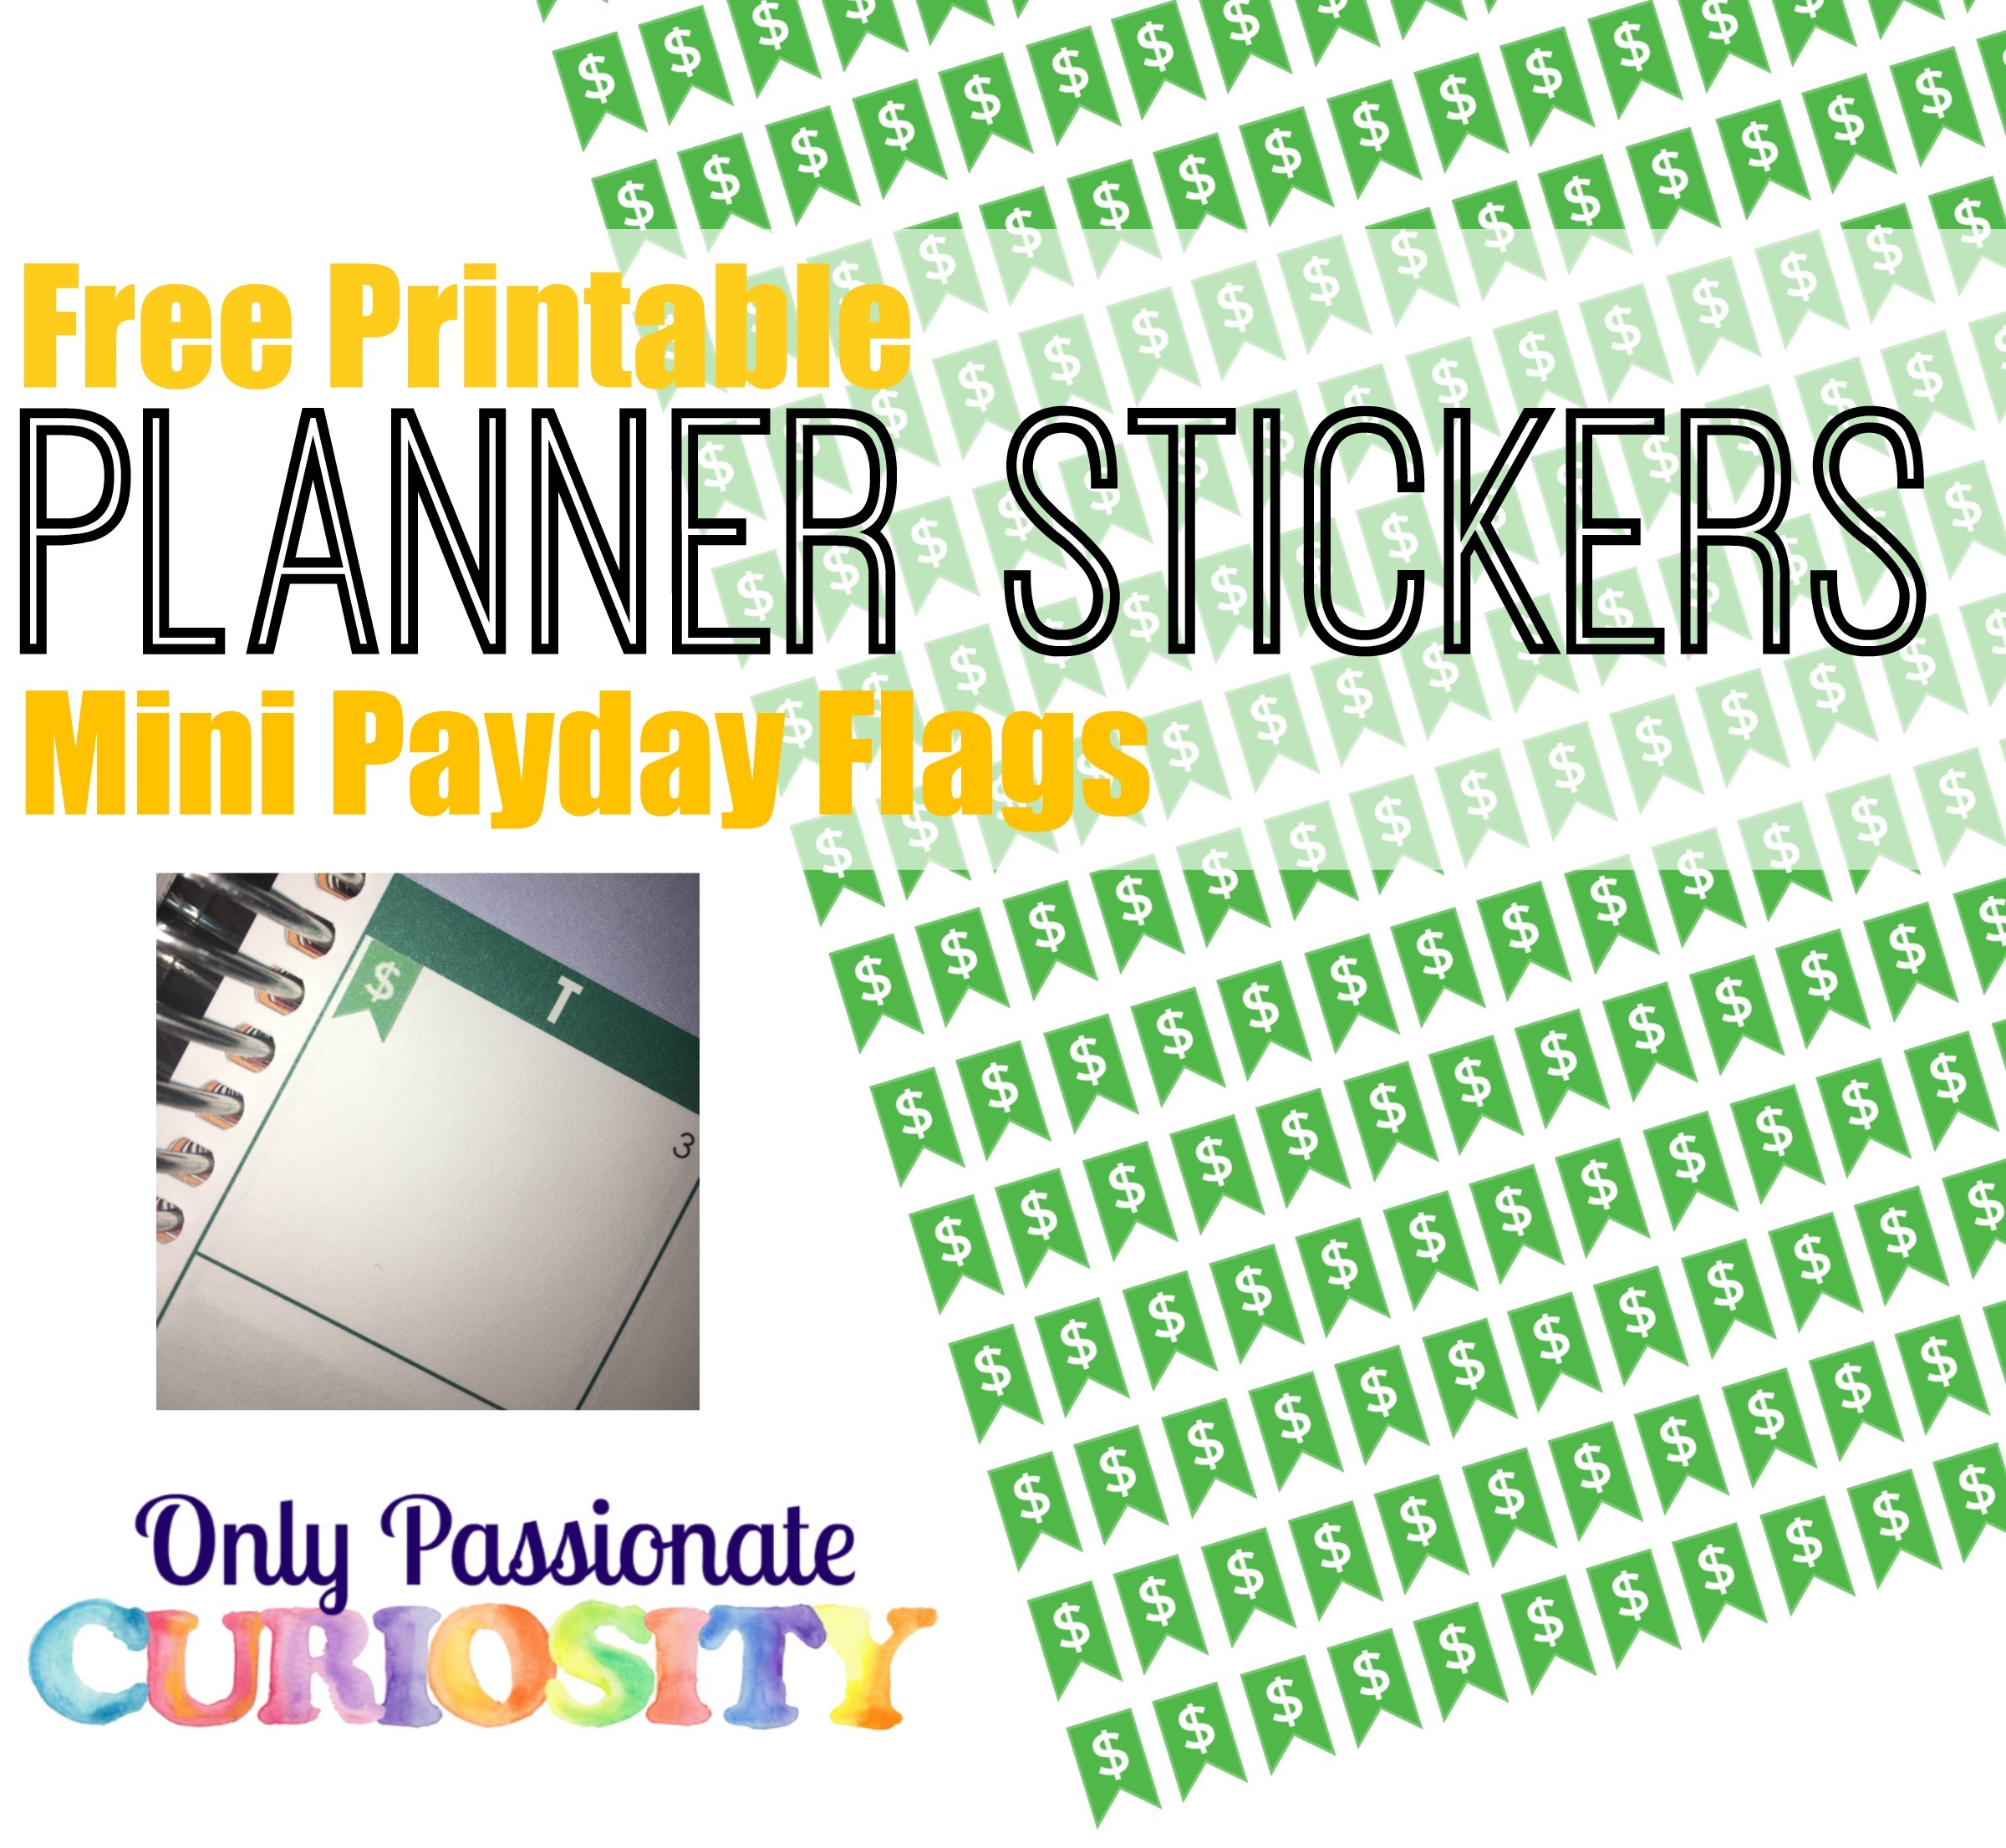 Printable Payday Flag Planner Stickers - Only Passionate Curiosity - Free Printable Payday Stickers